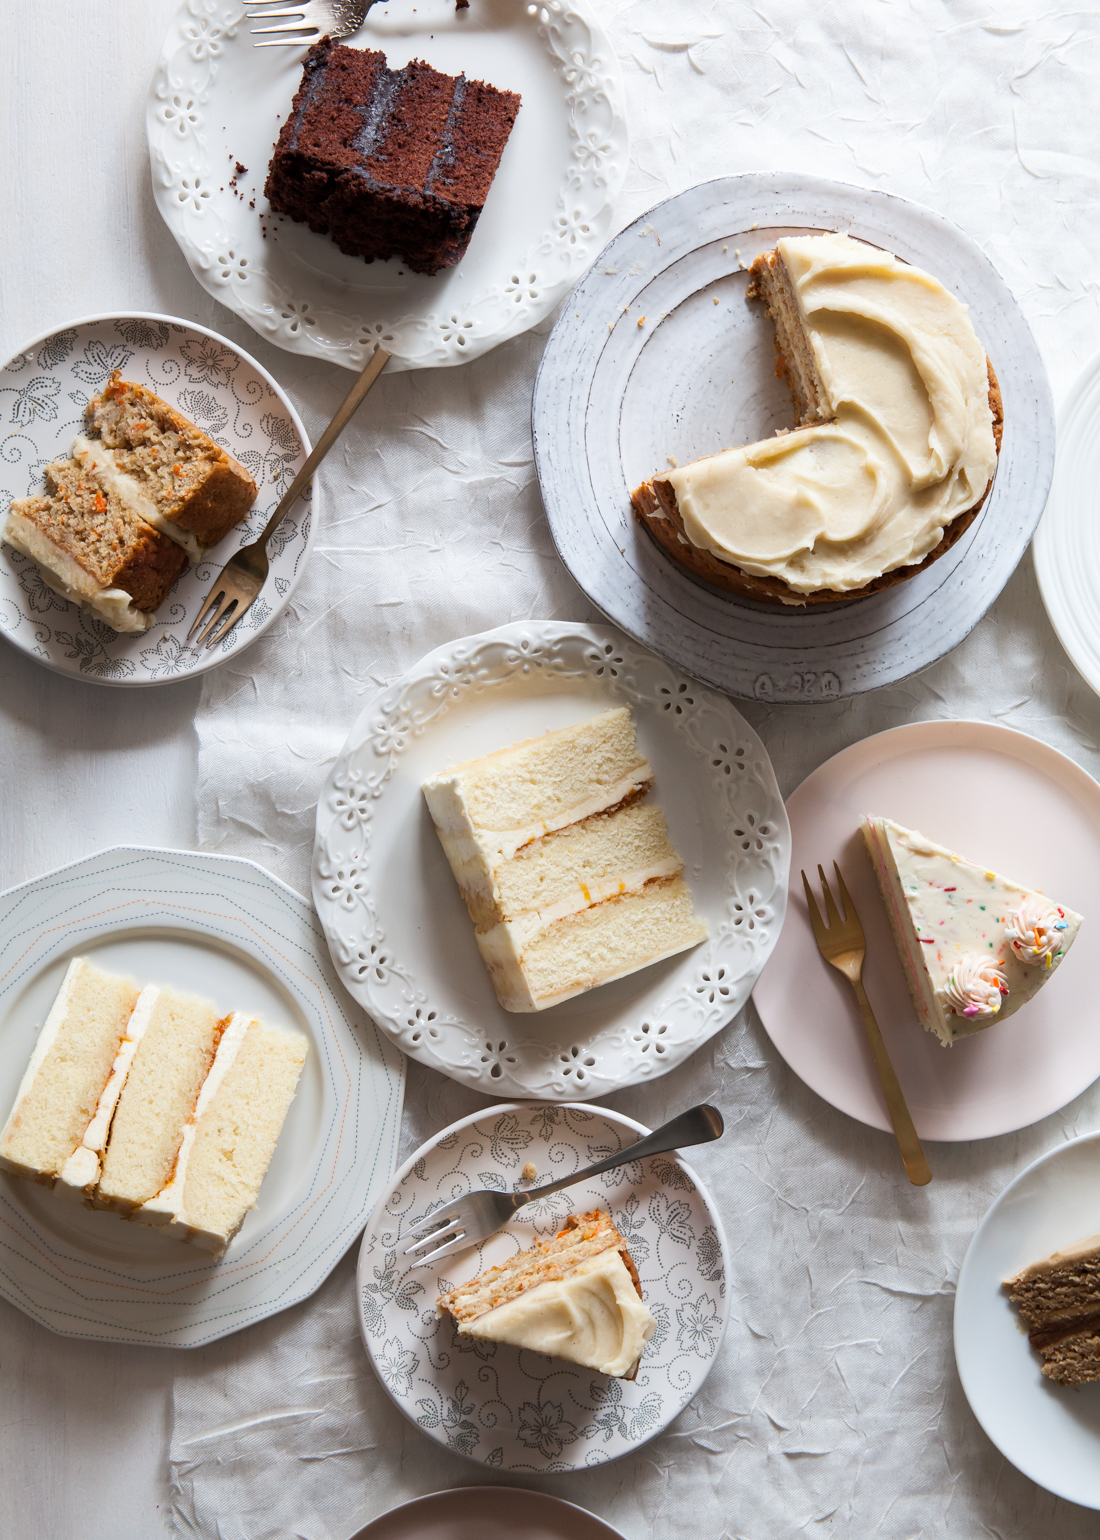 Outtake from "Layered" of various cake slices.